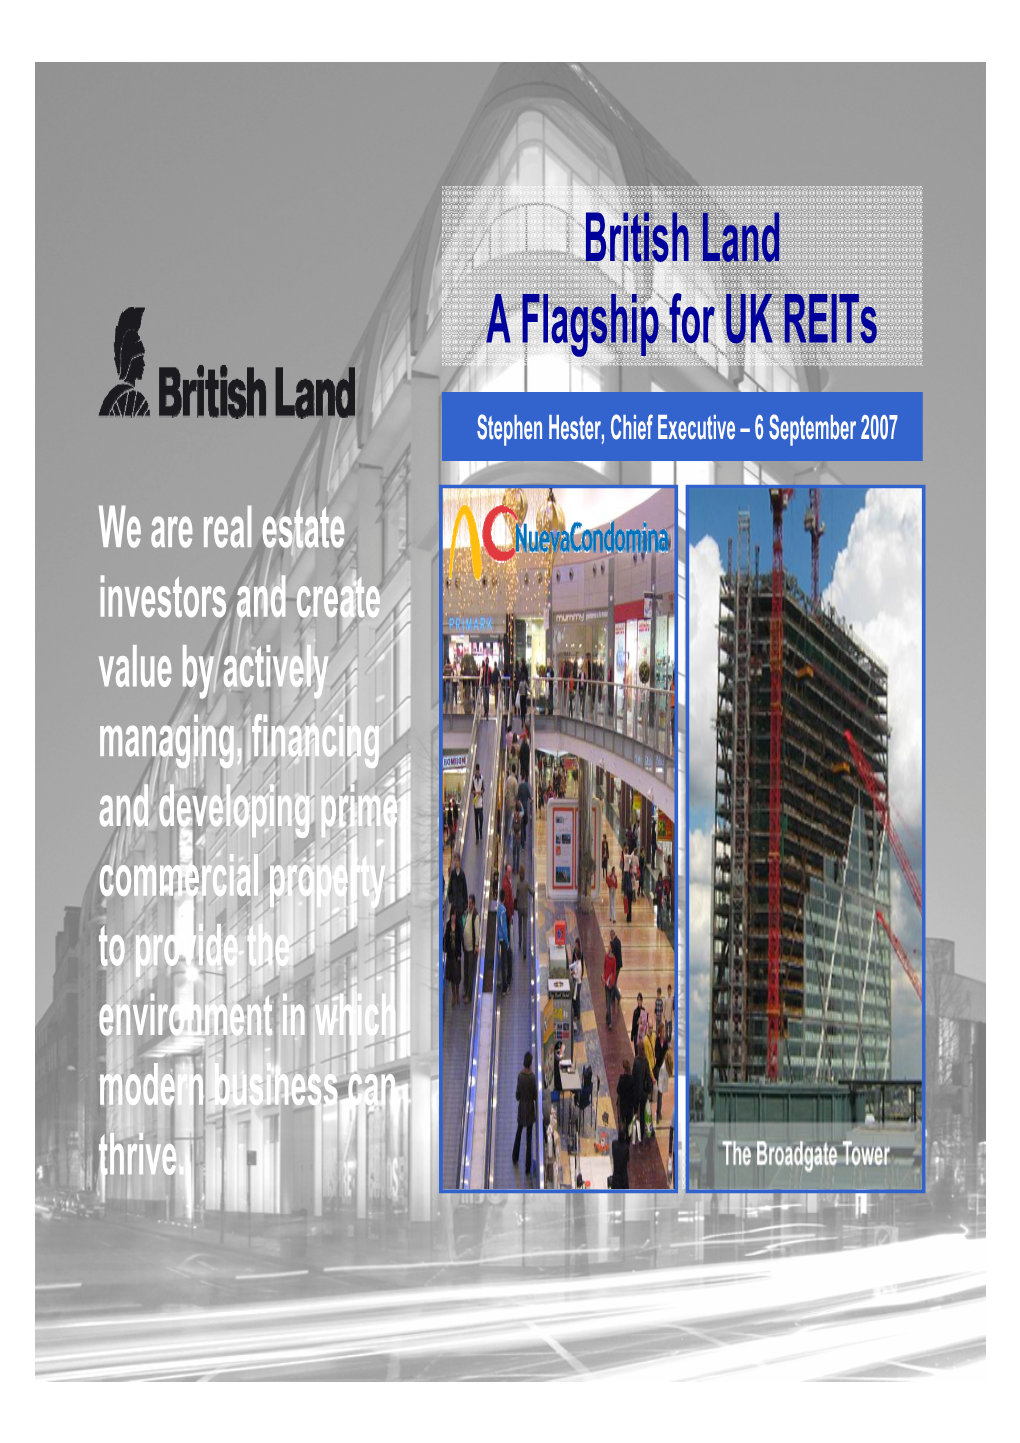 British Land a Flagship for UK Reits